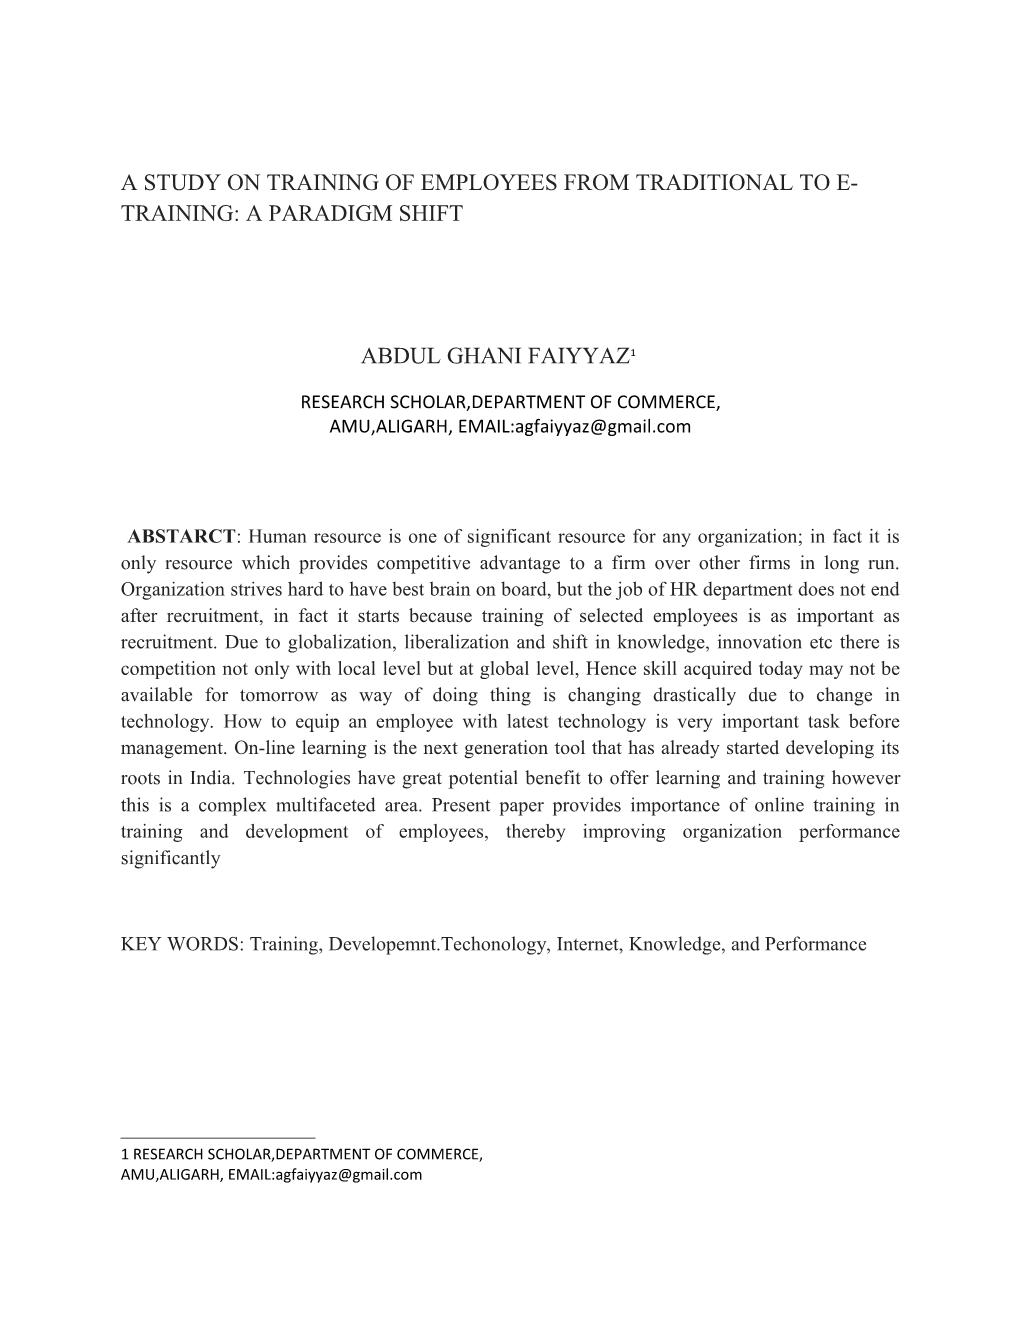 A Study on Training of Employees from Traditional to E-Training: a Paradigm Shift